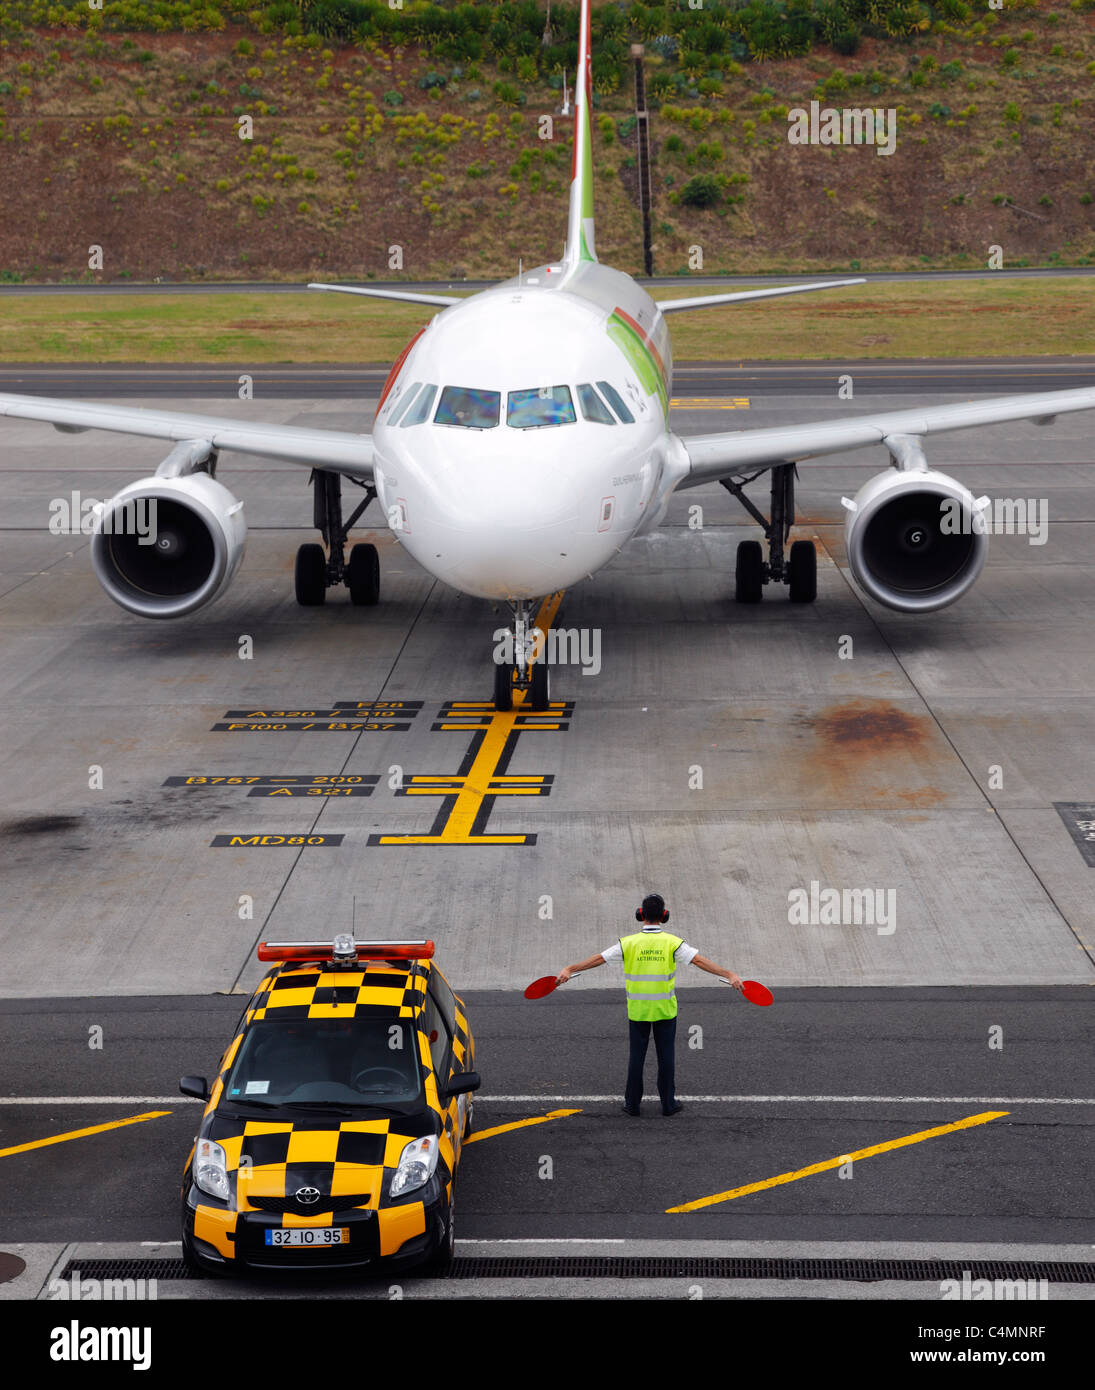 TAP Portugal Airbus 310 at Funchal airport Madeira. Stock Photo